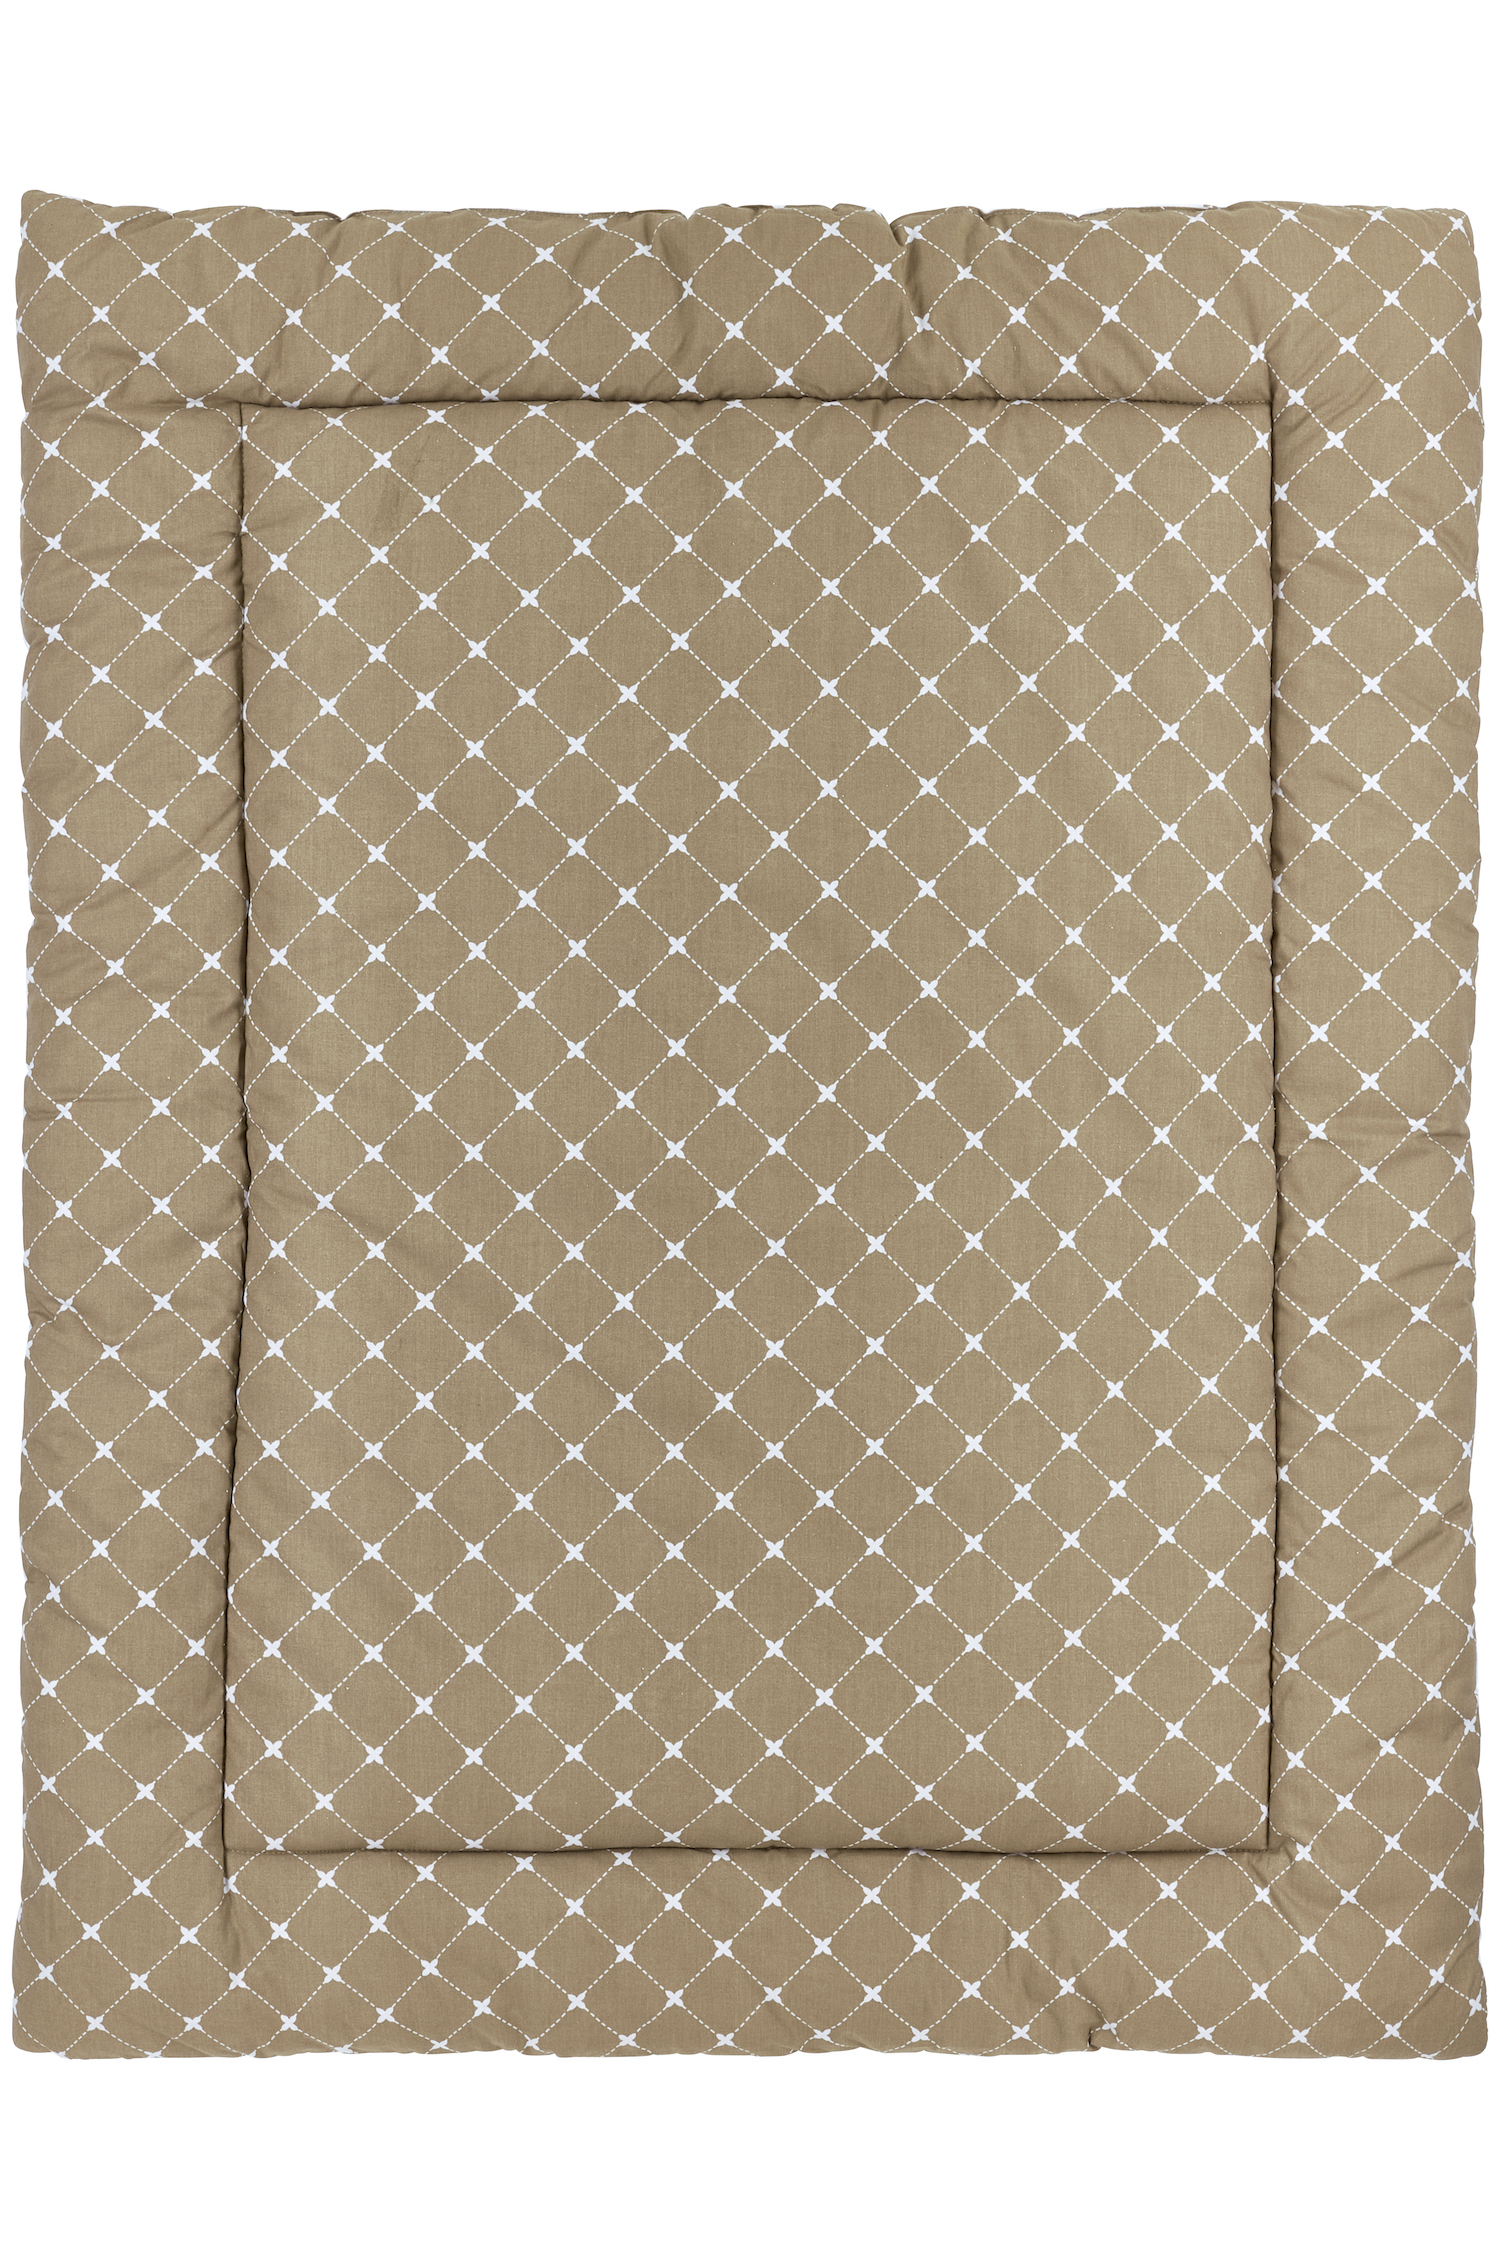 Boxkleed - taupe - 80x100cm